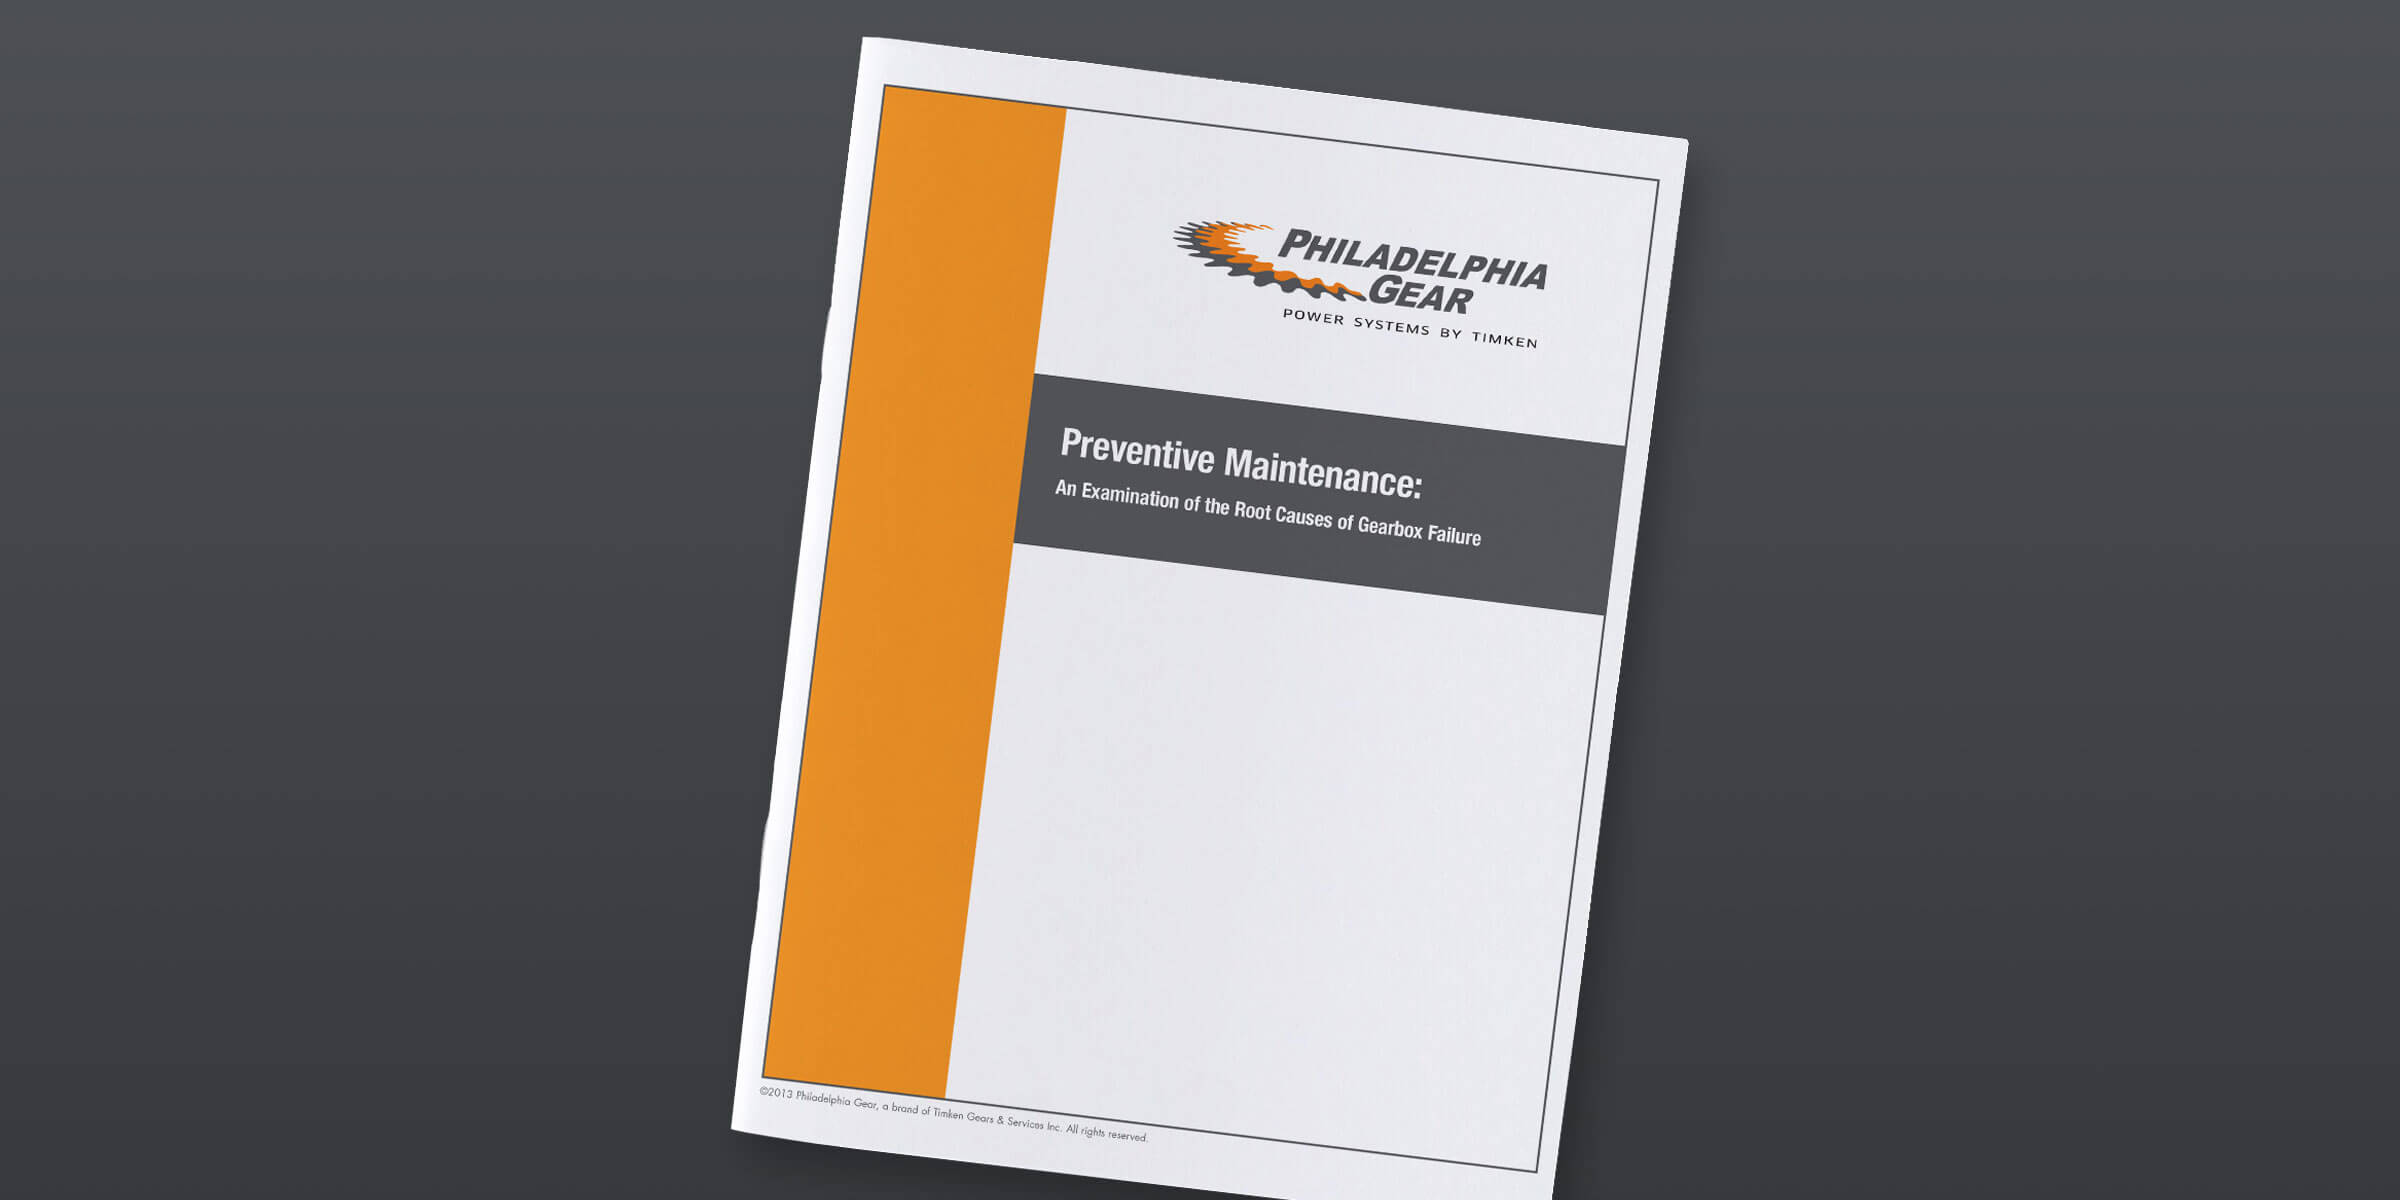 Philadelphia Gears preventative maintenance brochure for examination of the root cause of gear failure